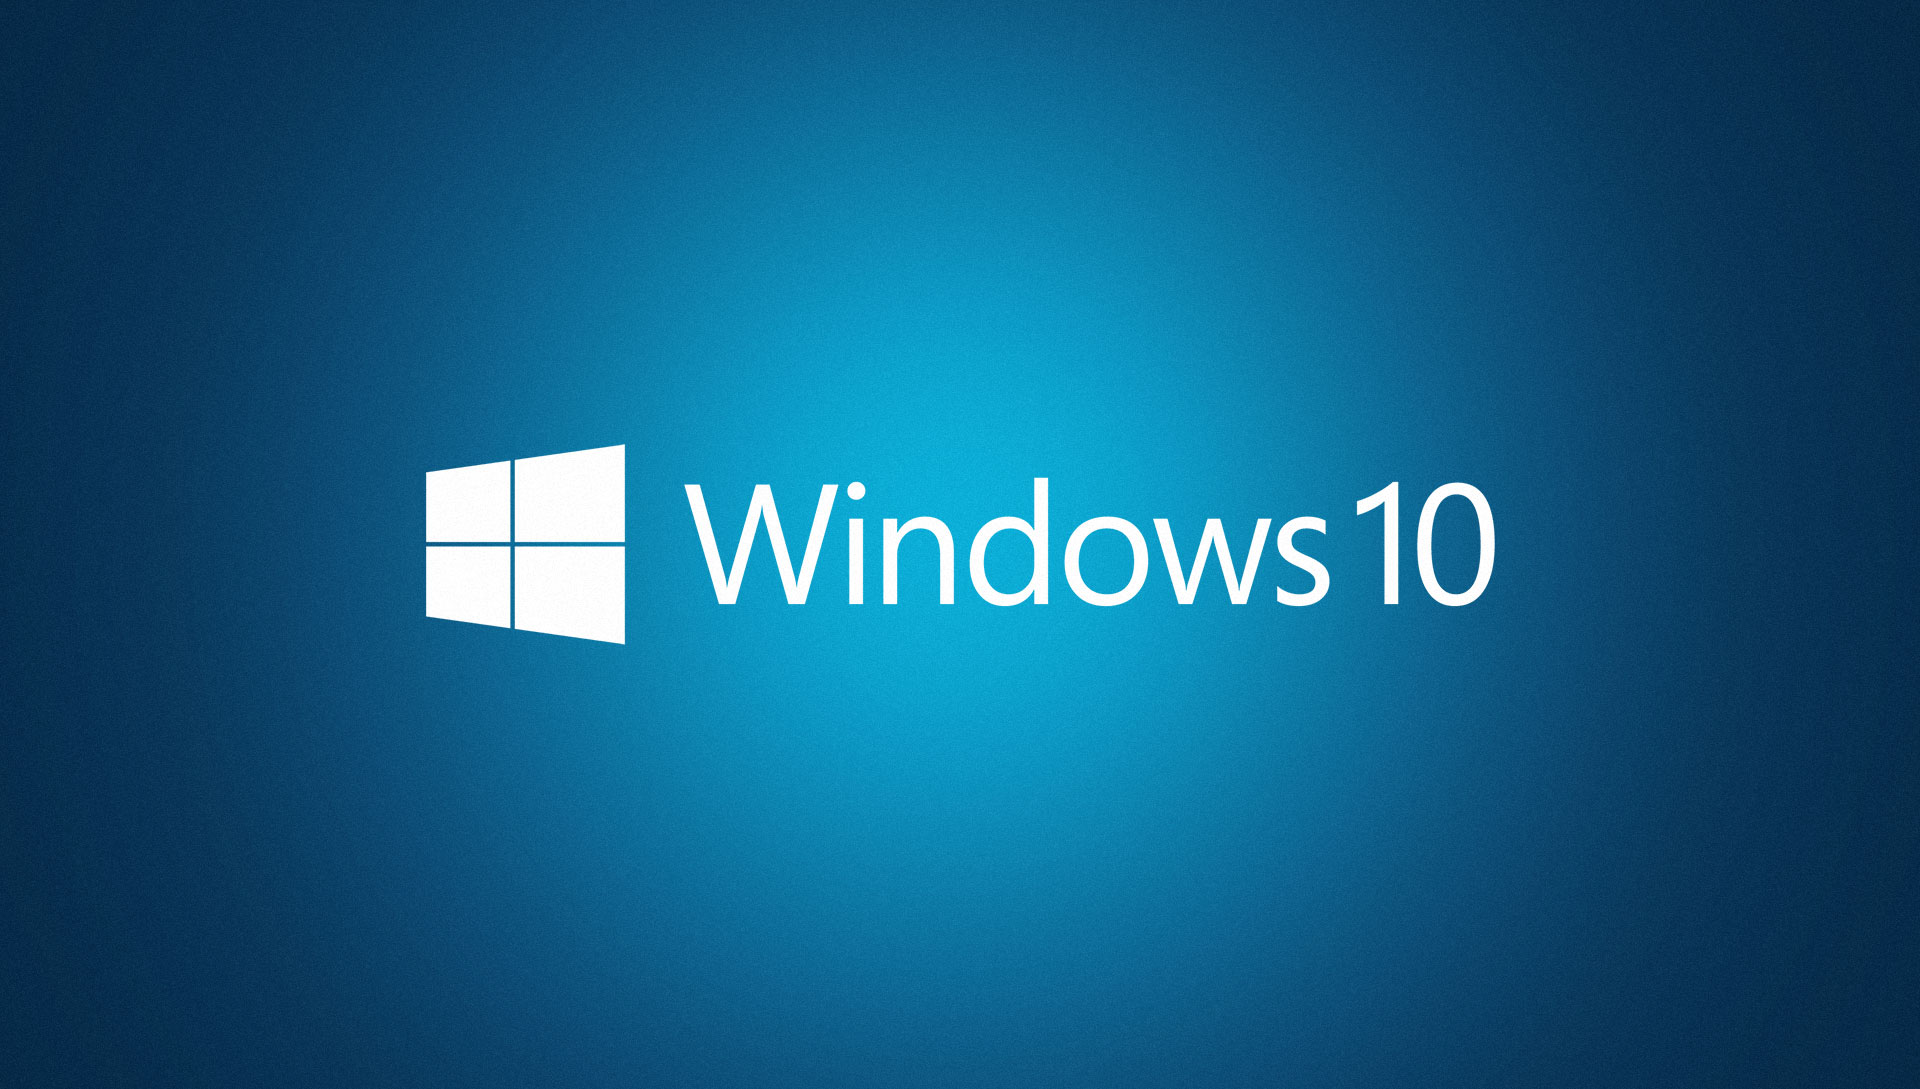 Watch The Windows Media Briefing Live Webcast On Wednesday